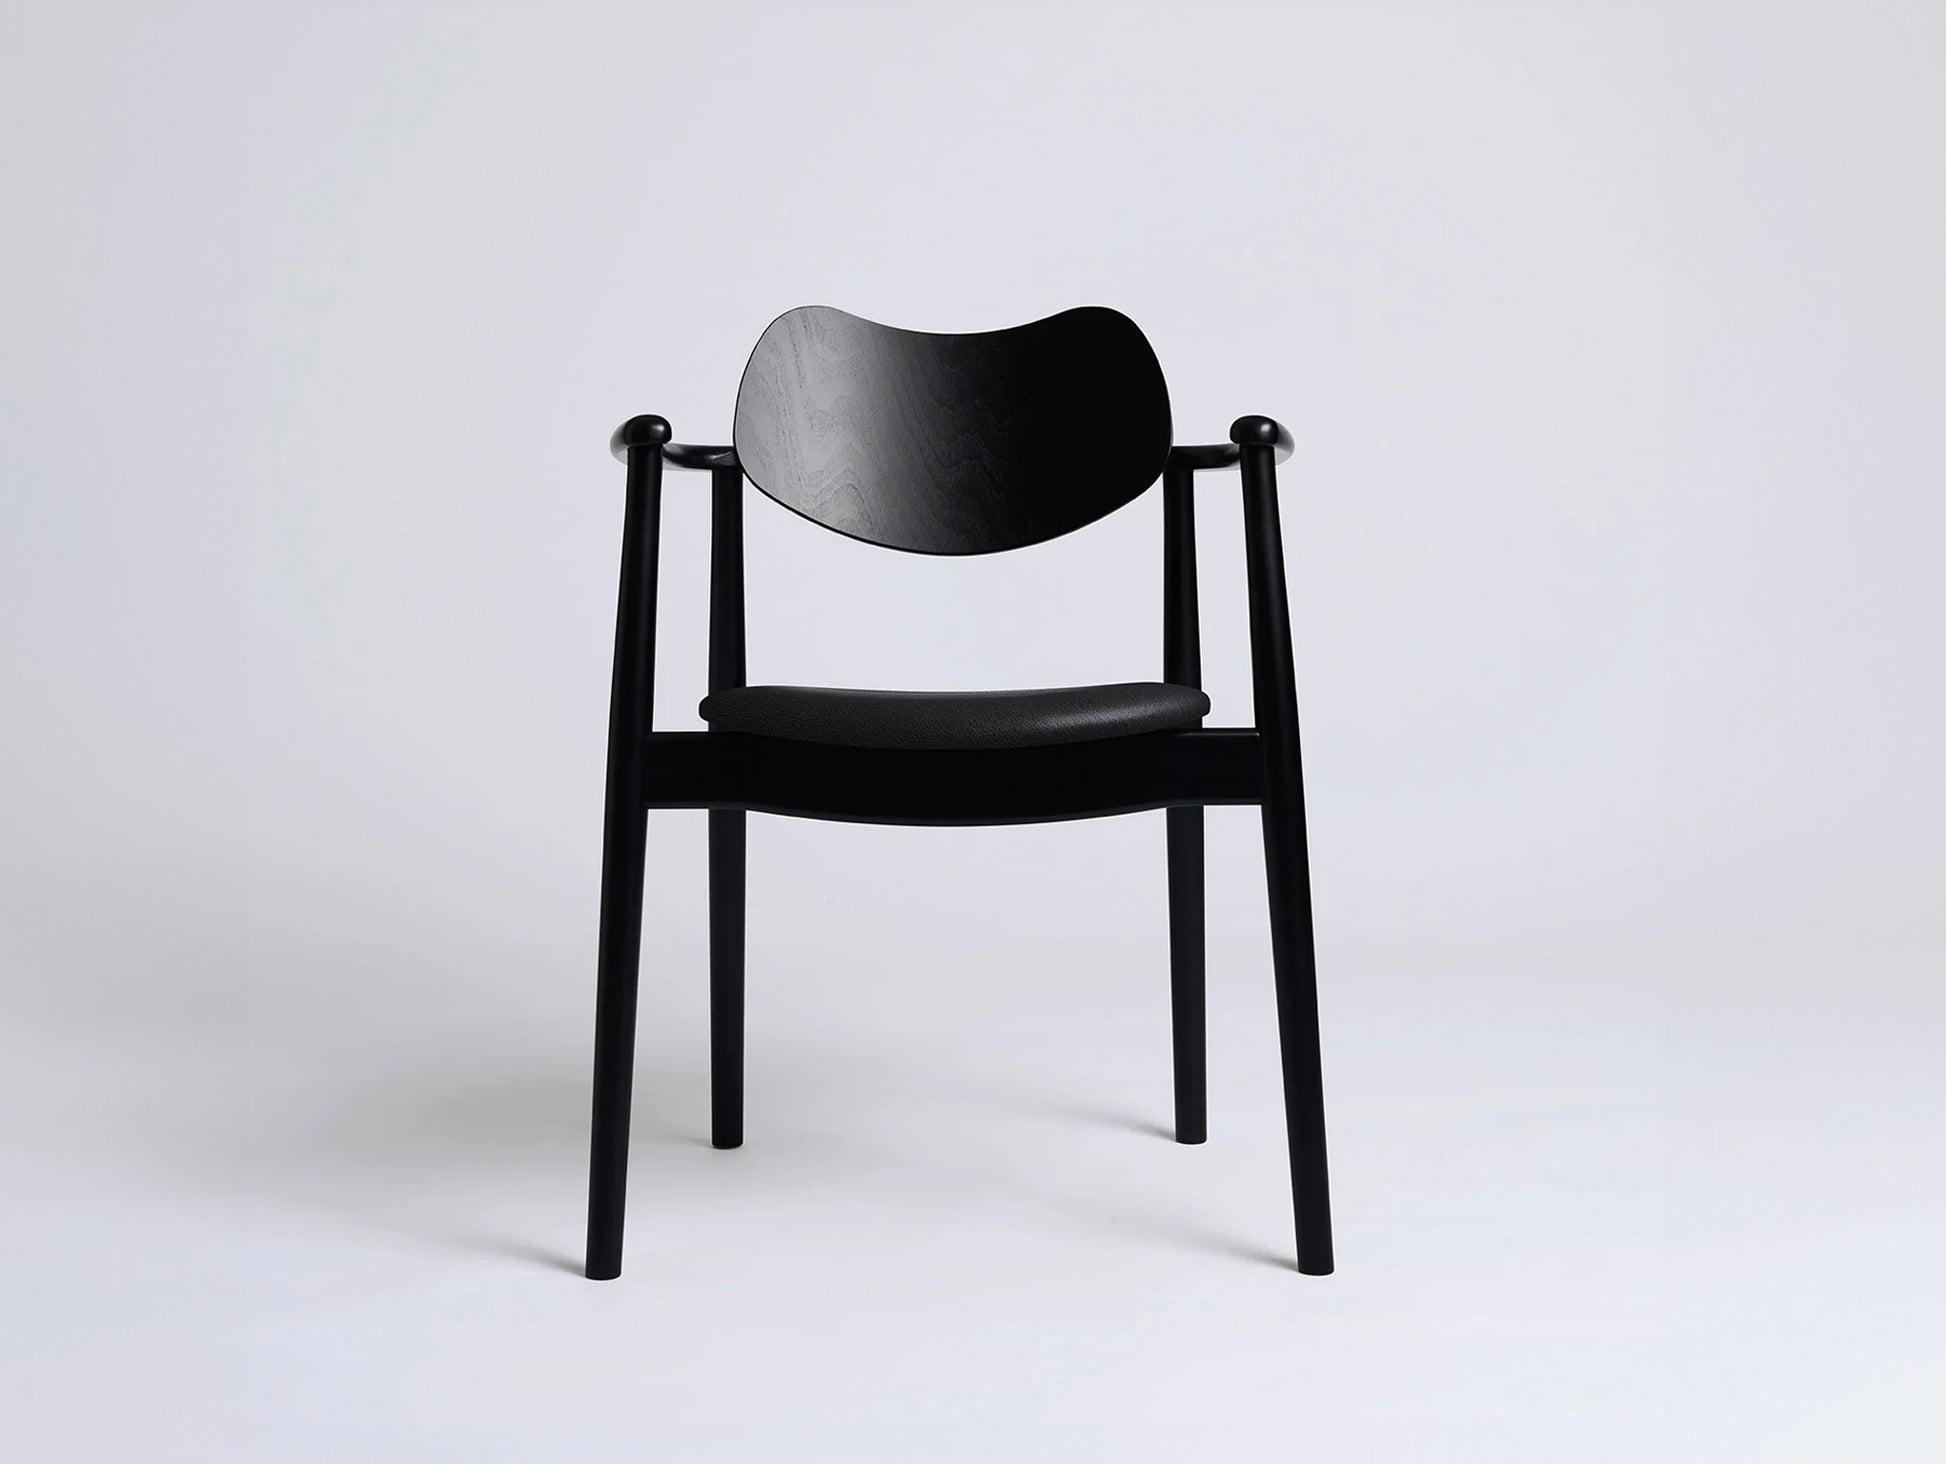 Regatta Chair Seat Upholstered by Ro Collection - Black Lacquered Beech / Standard Black Leather